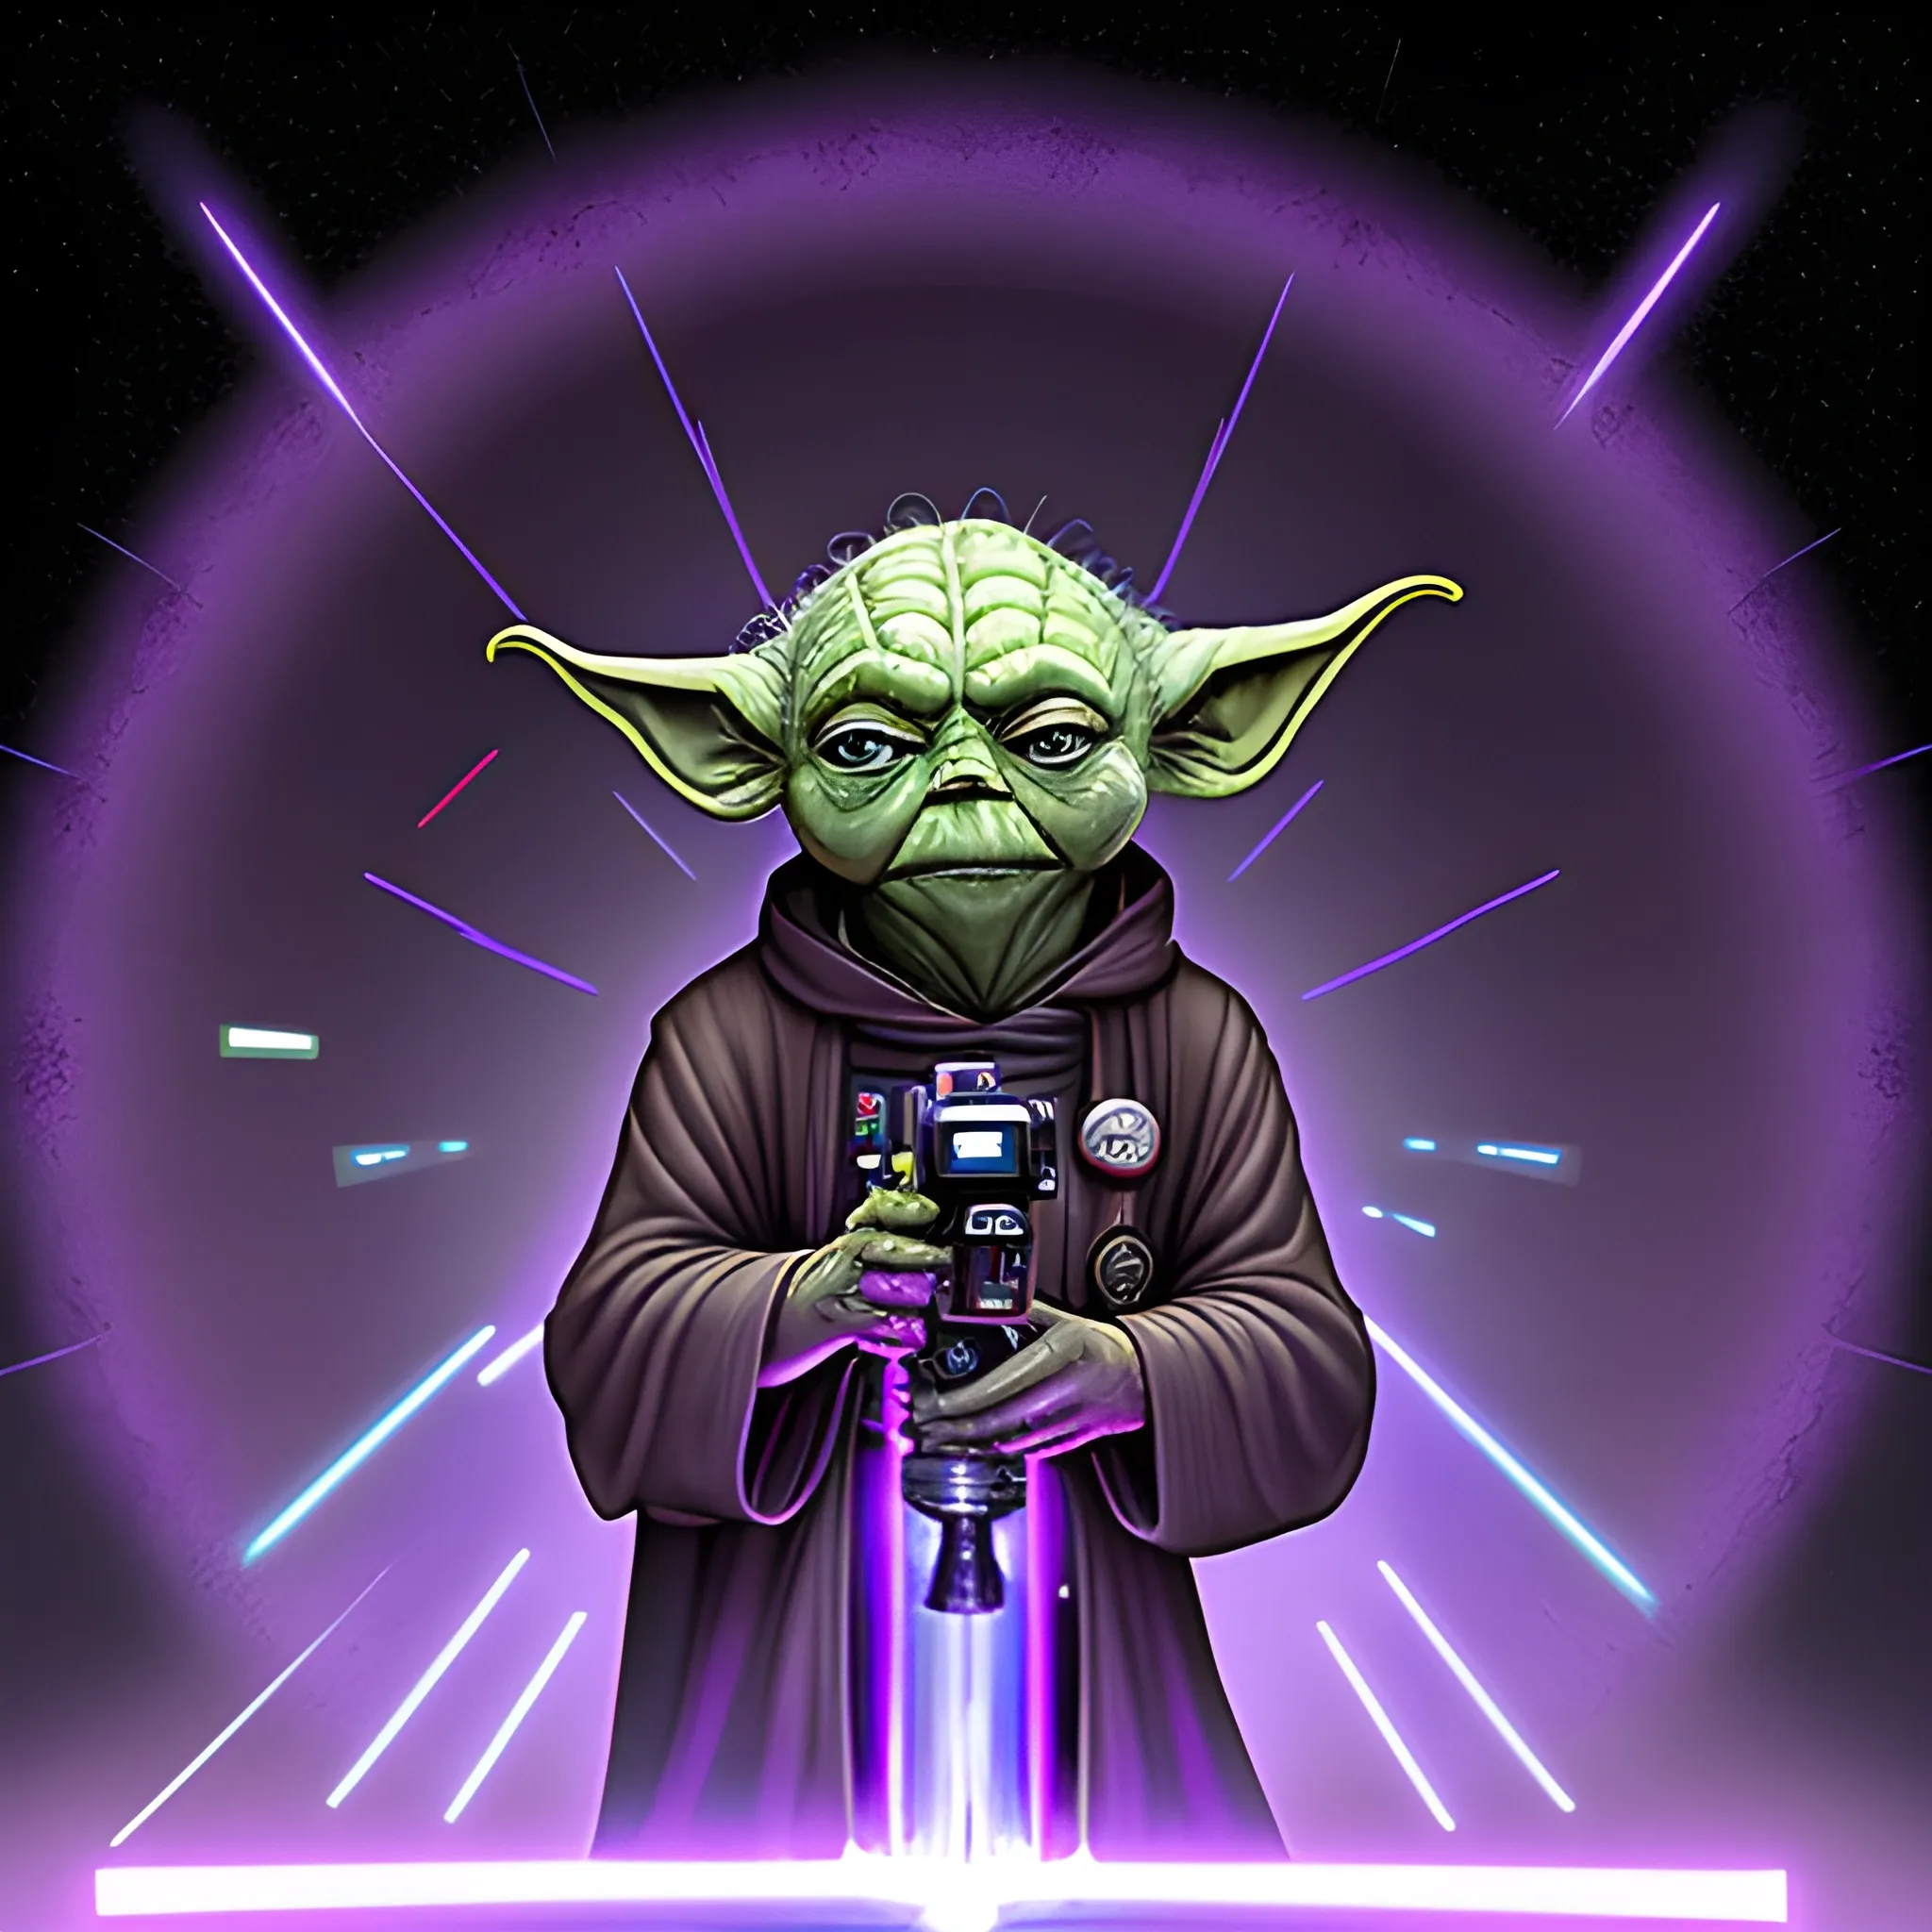 Baby Yoda on the dark side of the force, shooting red rays from his hands towards a purple R2D2, in a Jedi temple surrounded by crystals